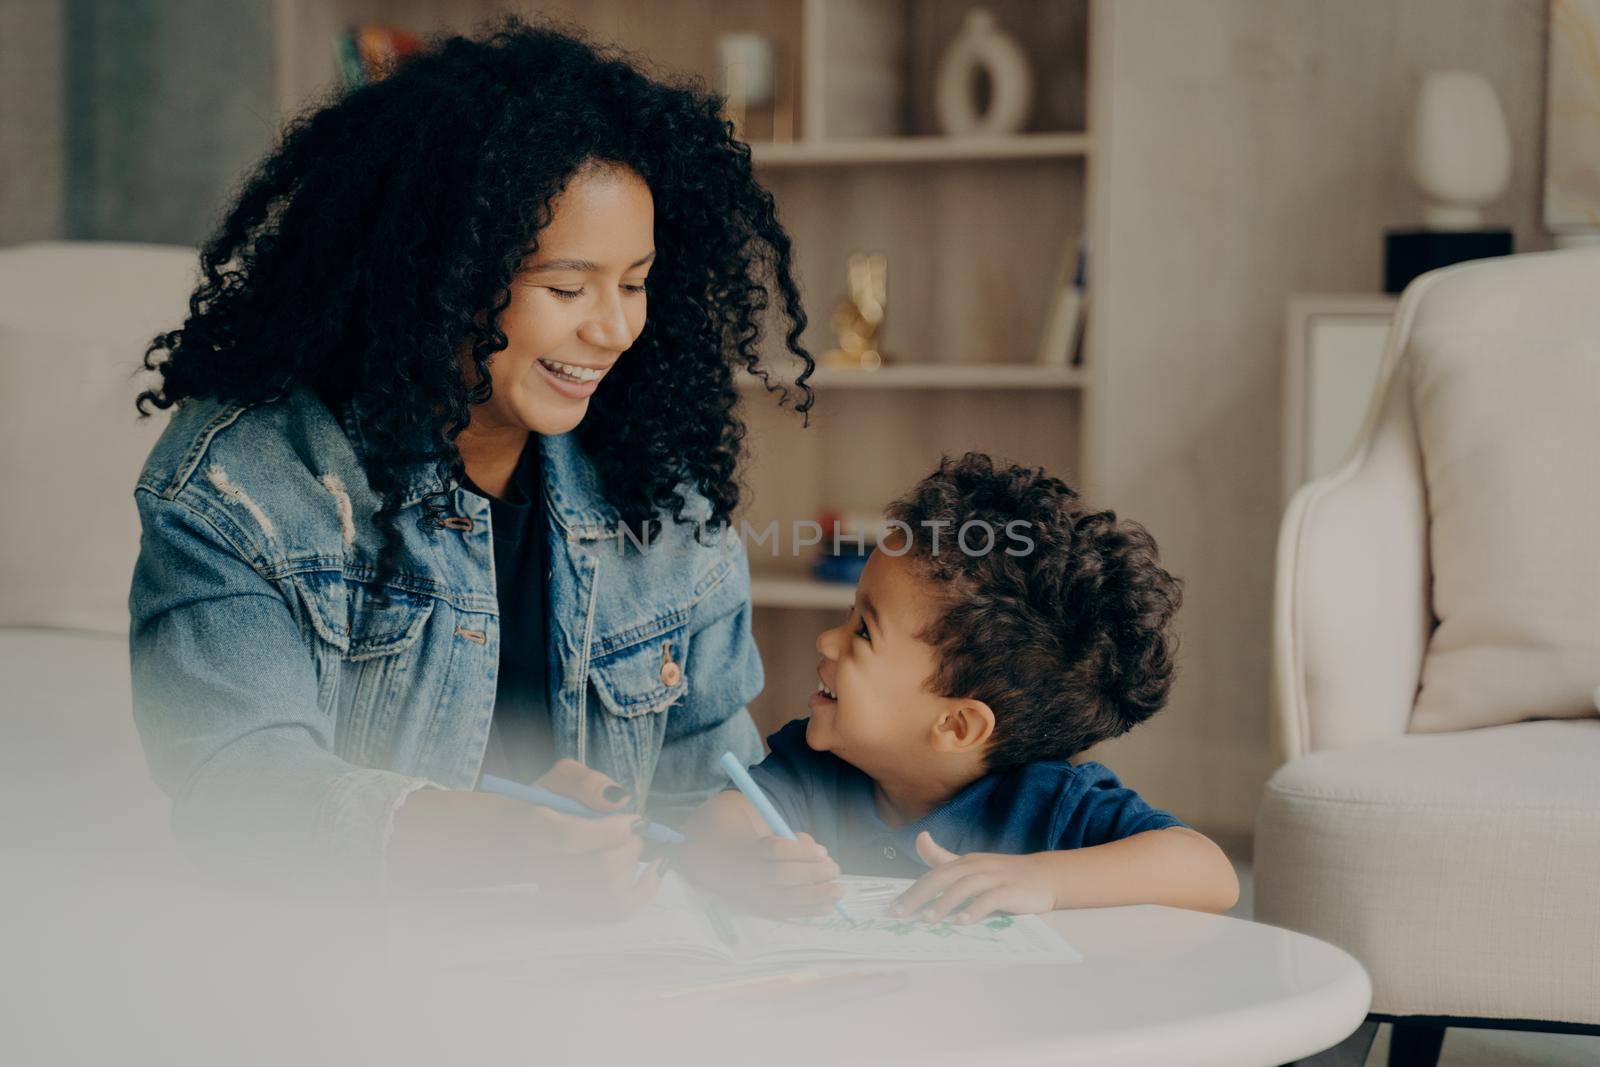 Portrait of happy joyful mixed race woman mom with long black curly hair sitting with little son in living room enjoying leisure time in each others company, learning how to draw. Happy maternity